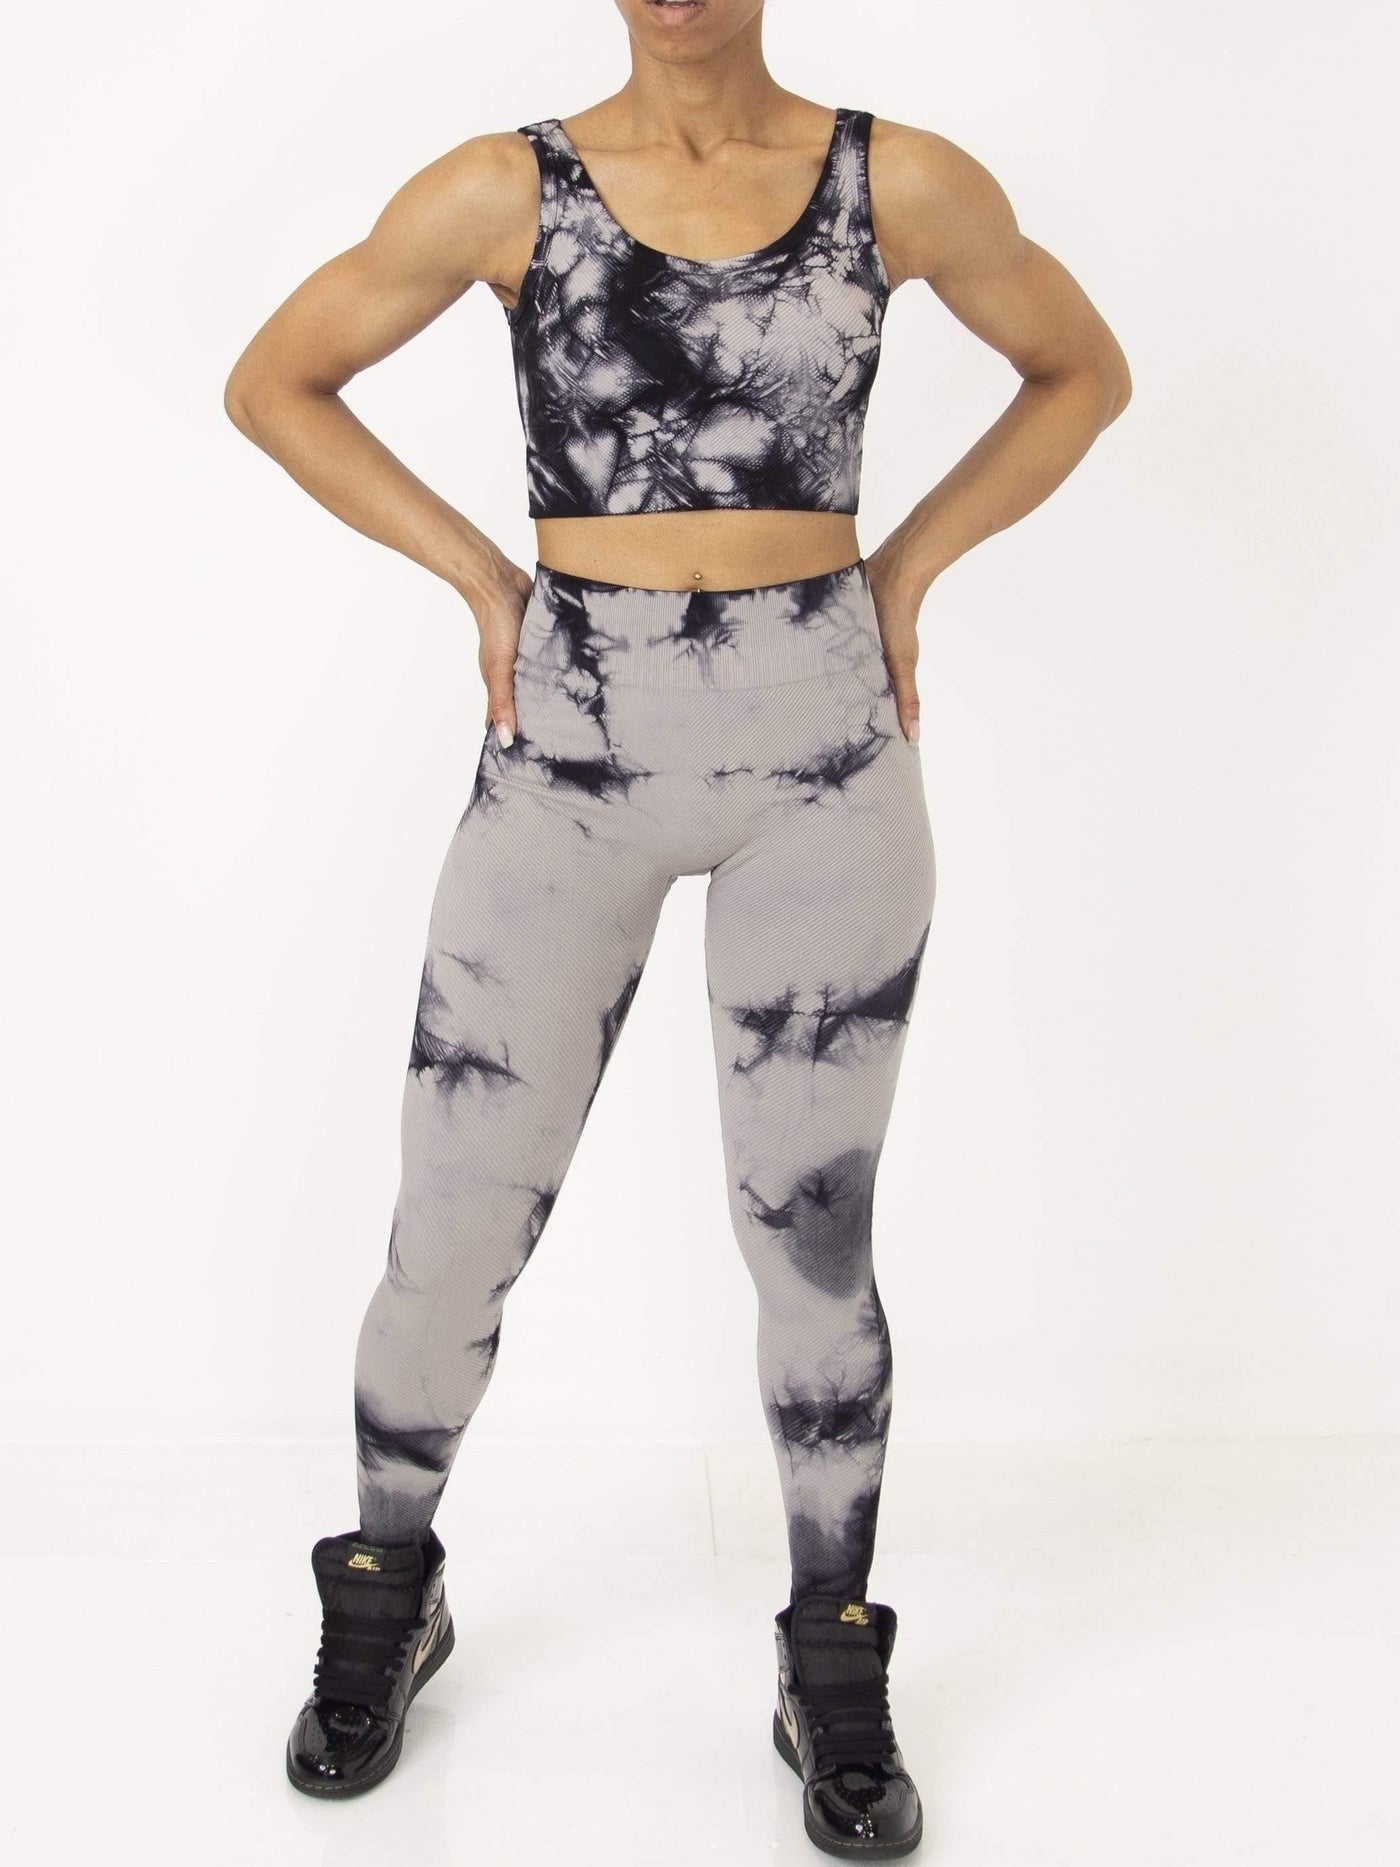 Hypnotize | Tie-dye Yoga Activewear Set SIZE LARGE - Statement Piece NY _tab_final-sale, _tab_size-chart, Activewear, Activewear & Loungewear, Black, Brooklyn Boutique, chic, final sale, leggings, Lounge, Misses, not clearance, Red, Set, Sets, Ships from USA, SPNY Exclusive, sports bra, squat proof, squatproof, statement, Statement Clothing, statement lounge, statement piece, Statement Piece Boutique, statement piece ny, Statement Pieces, Statement Pieces Boutique, Women's Boutique Statement Lounge